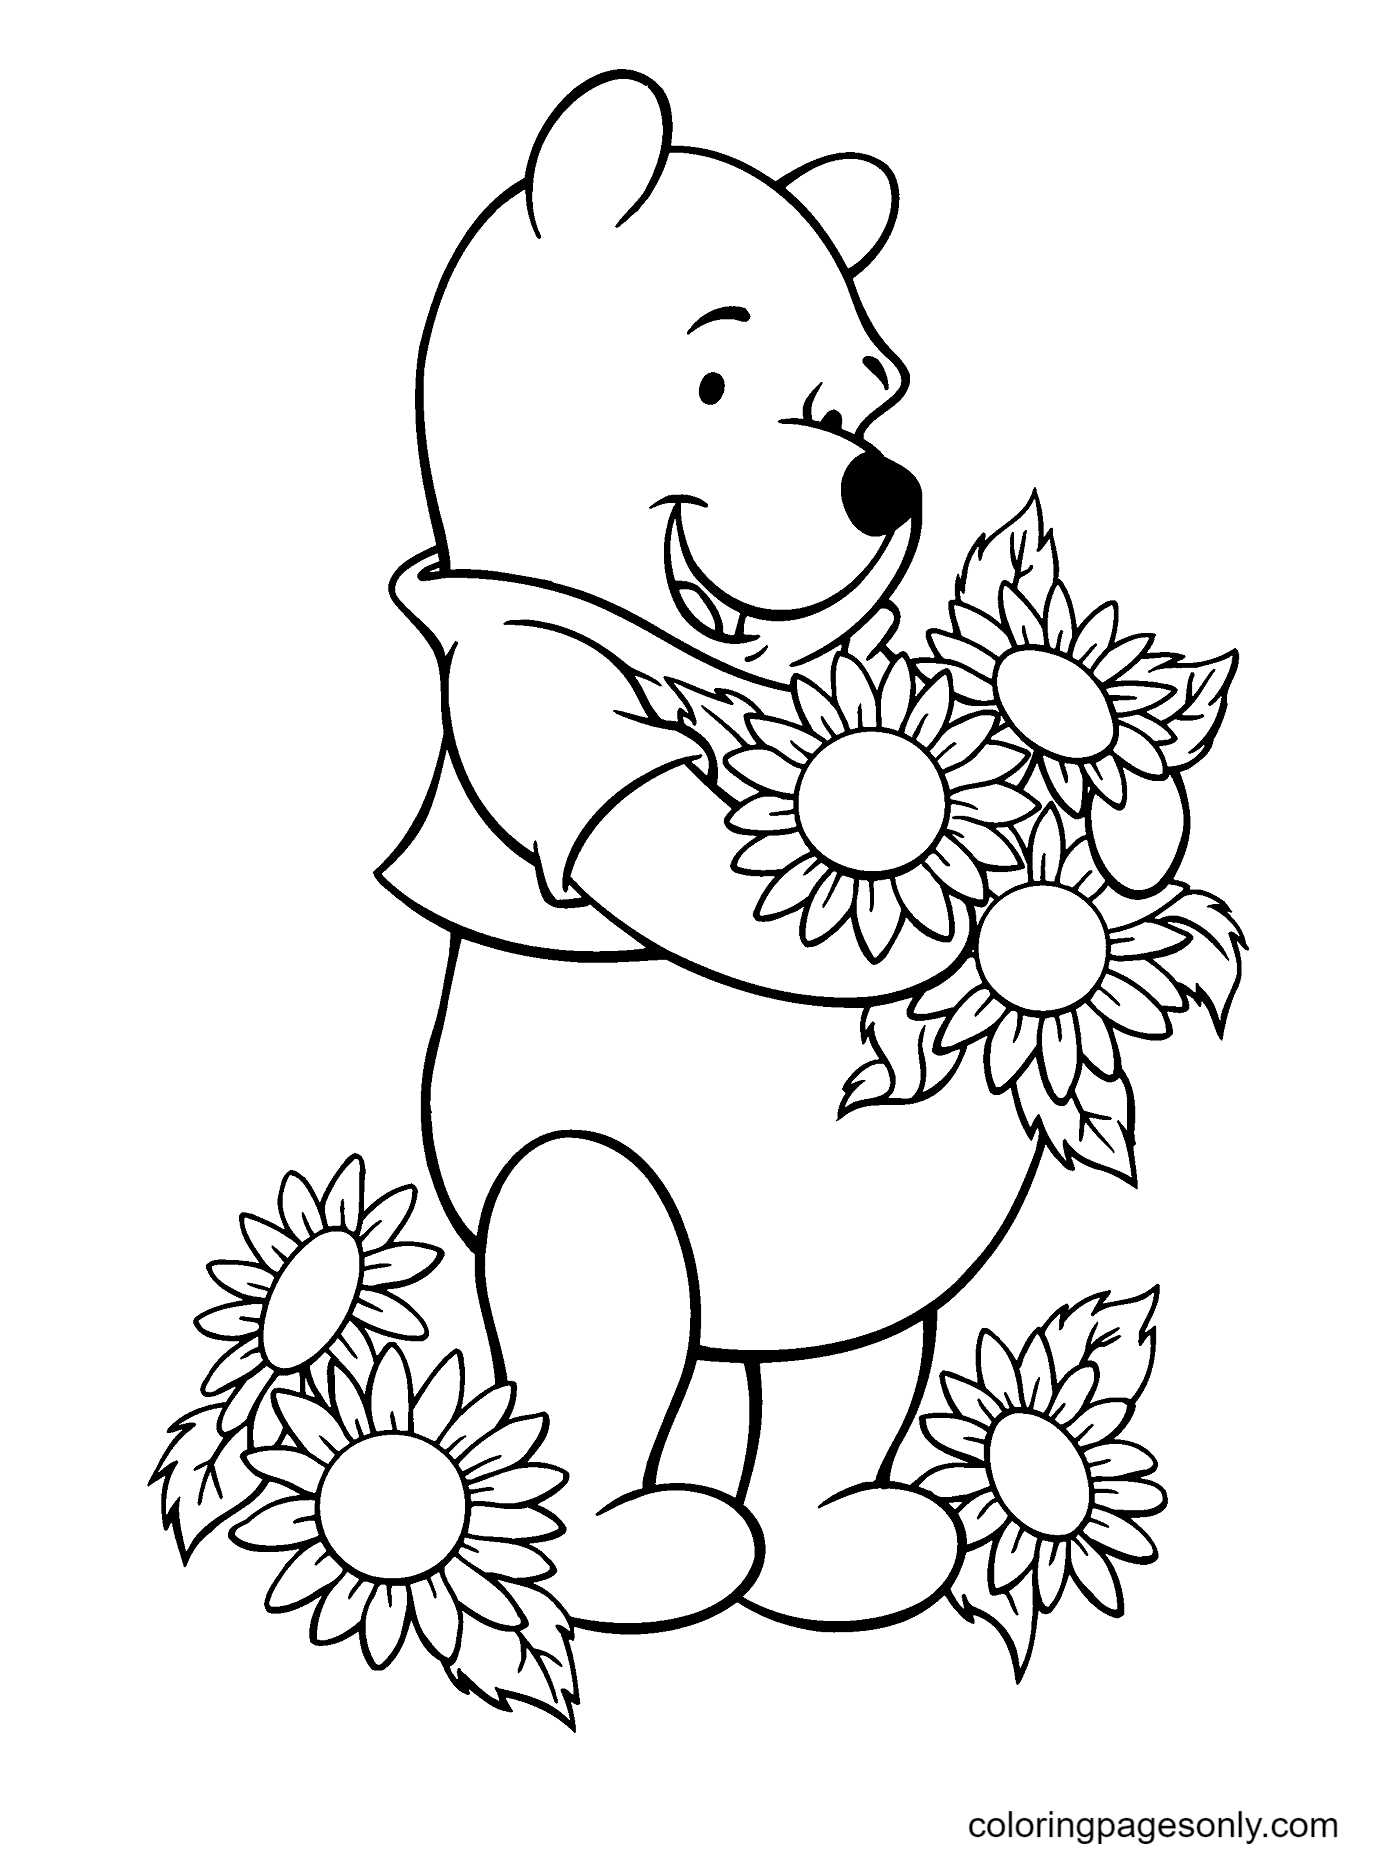 Pooh Loves Flowers Coloring Pages